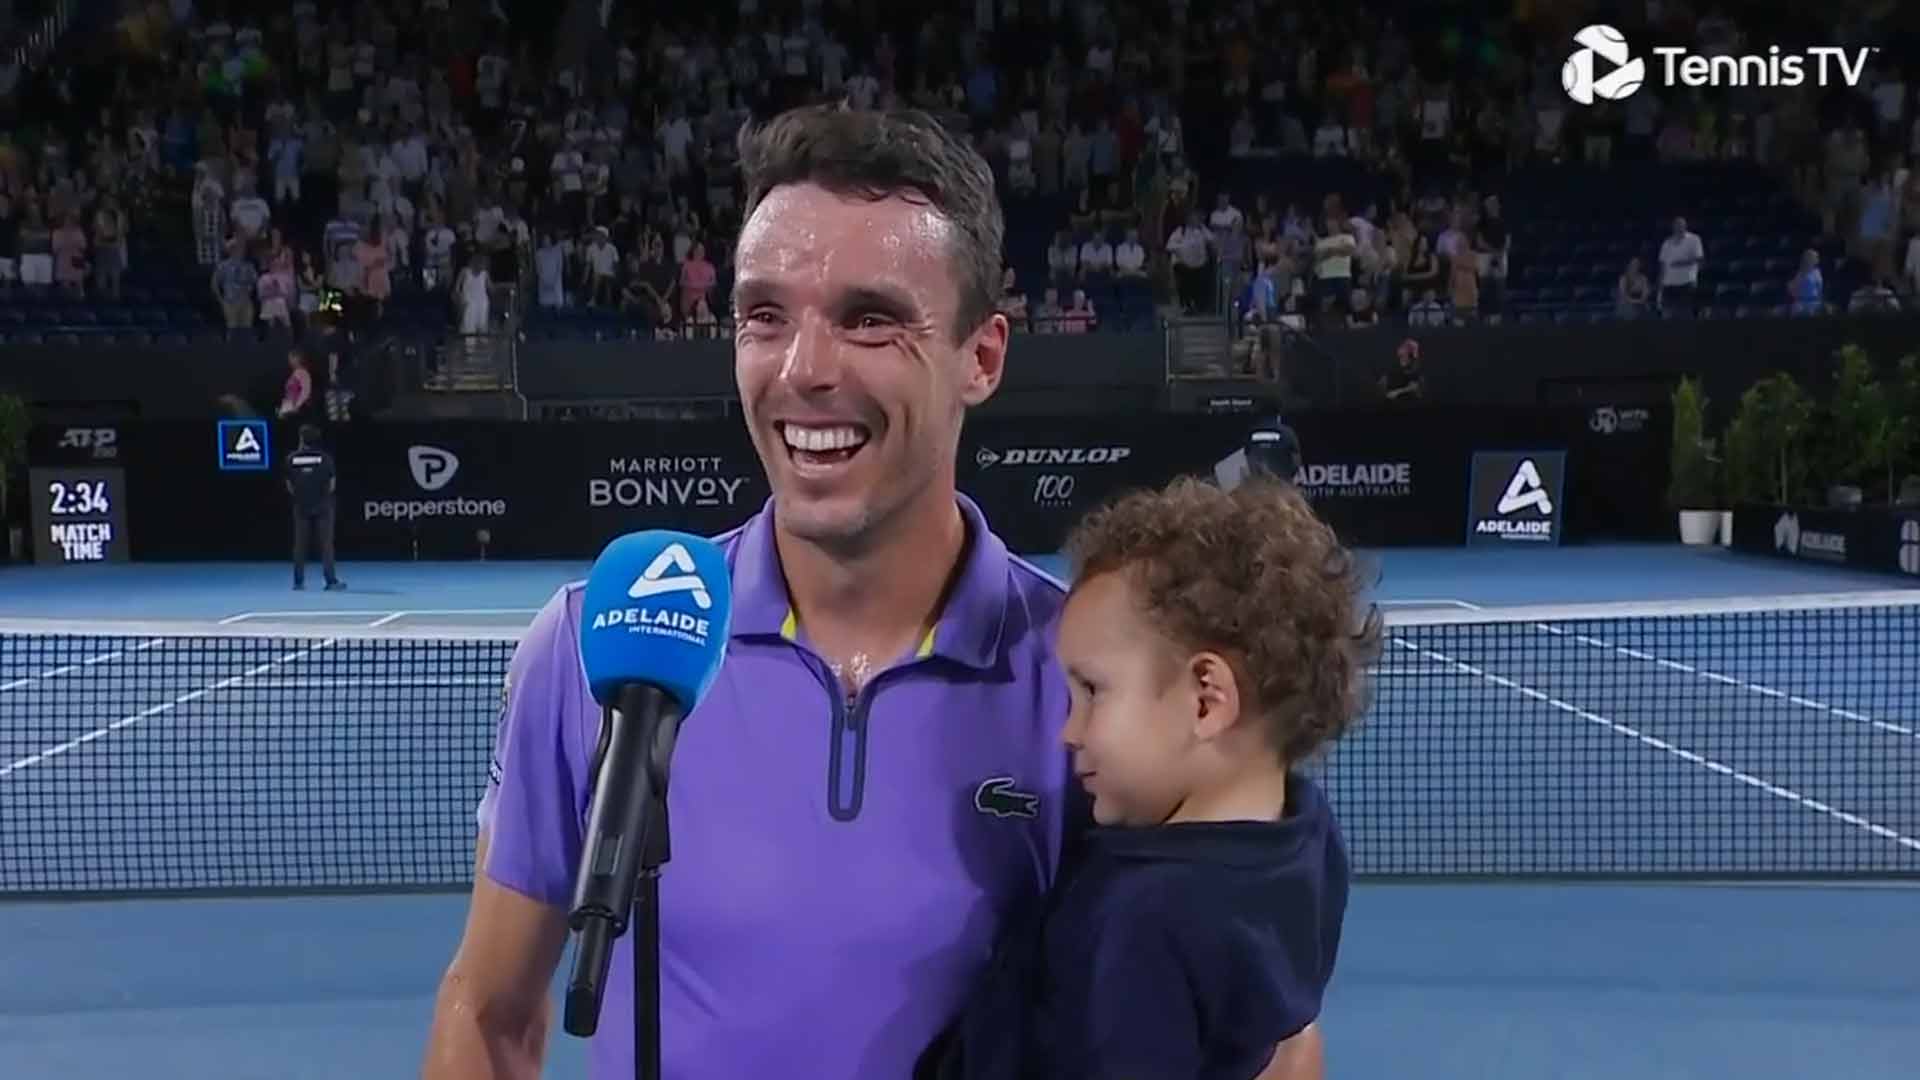 Roberto Bautista Agut shares a laugh with his son at the Adelaide International 2.